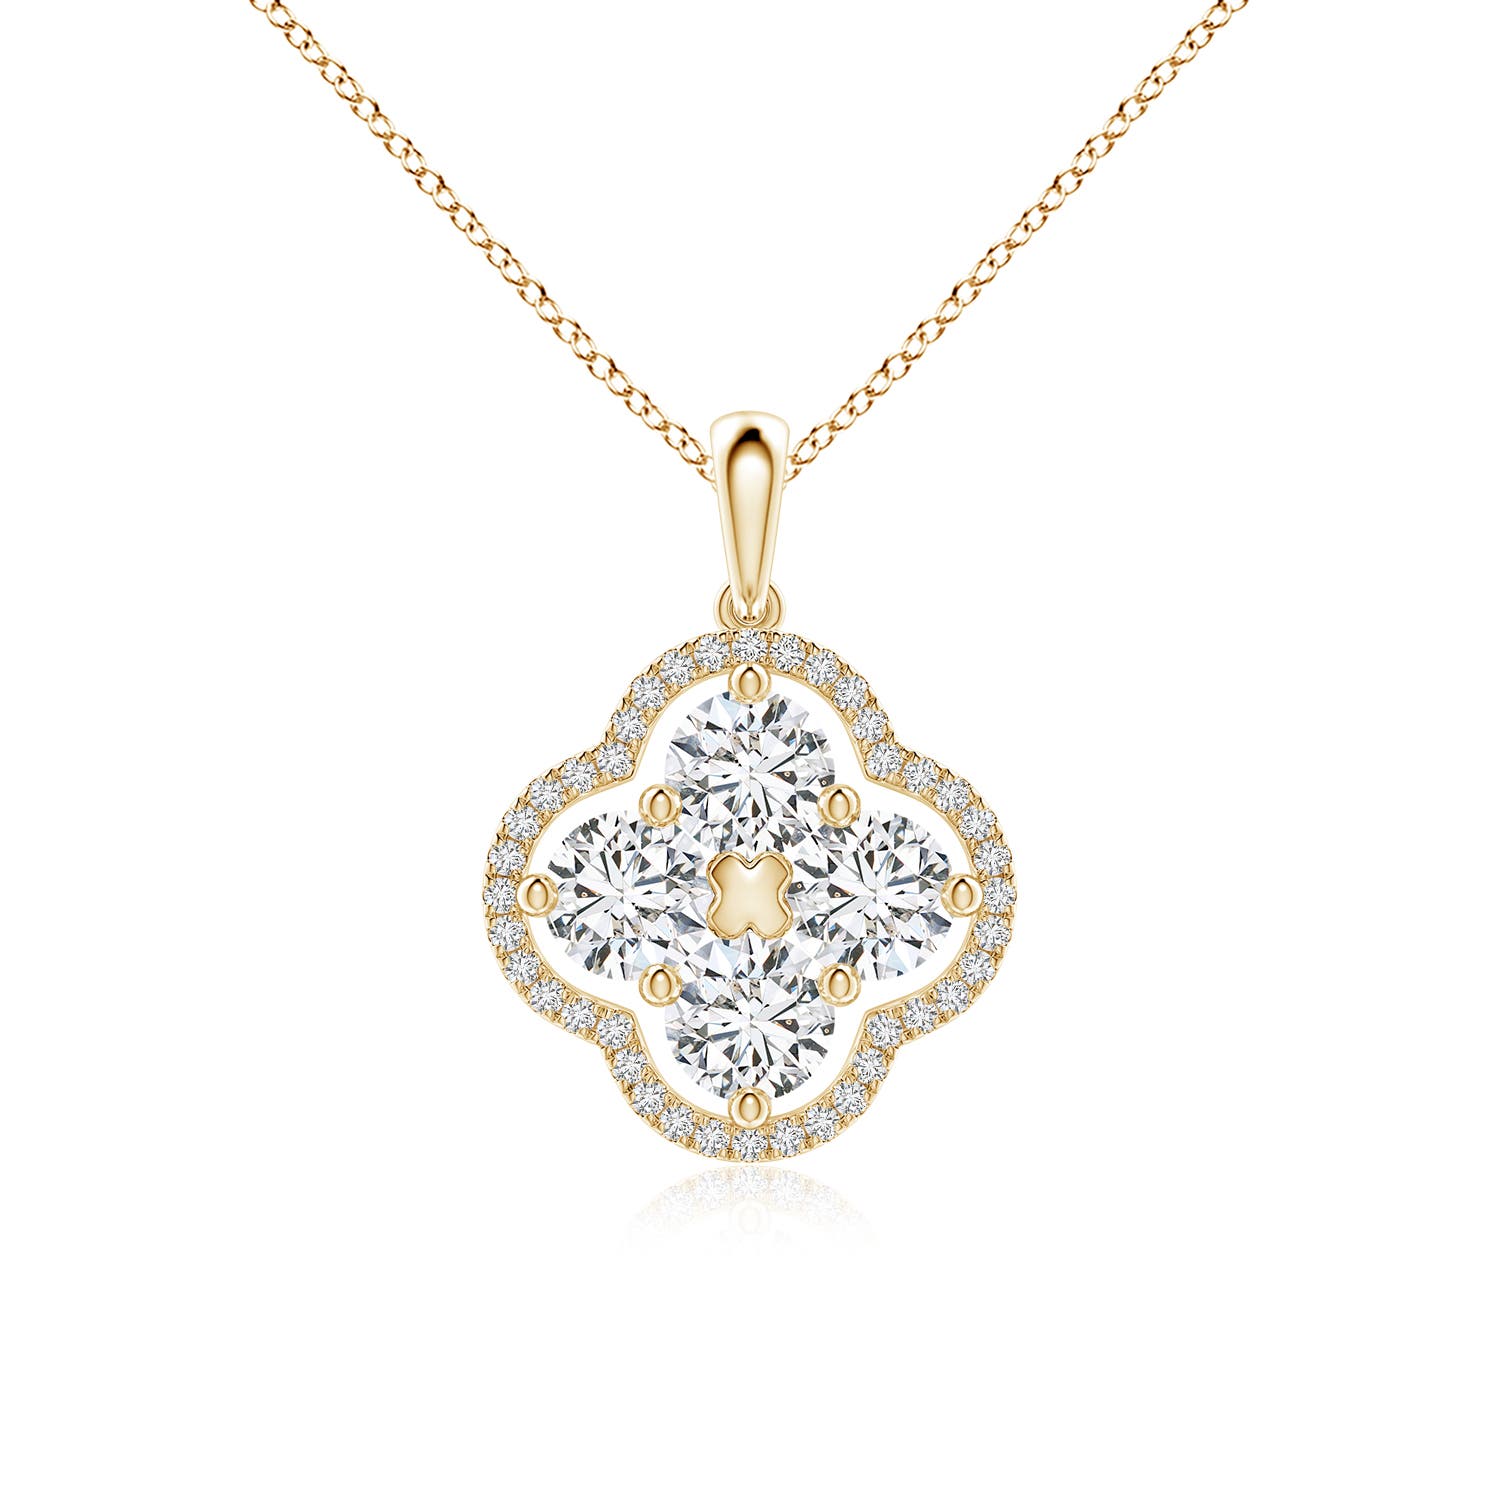 H, SI2 / 1.6 CT / 18 KT Yellow Gold